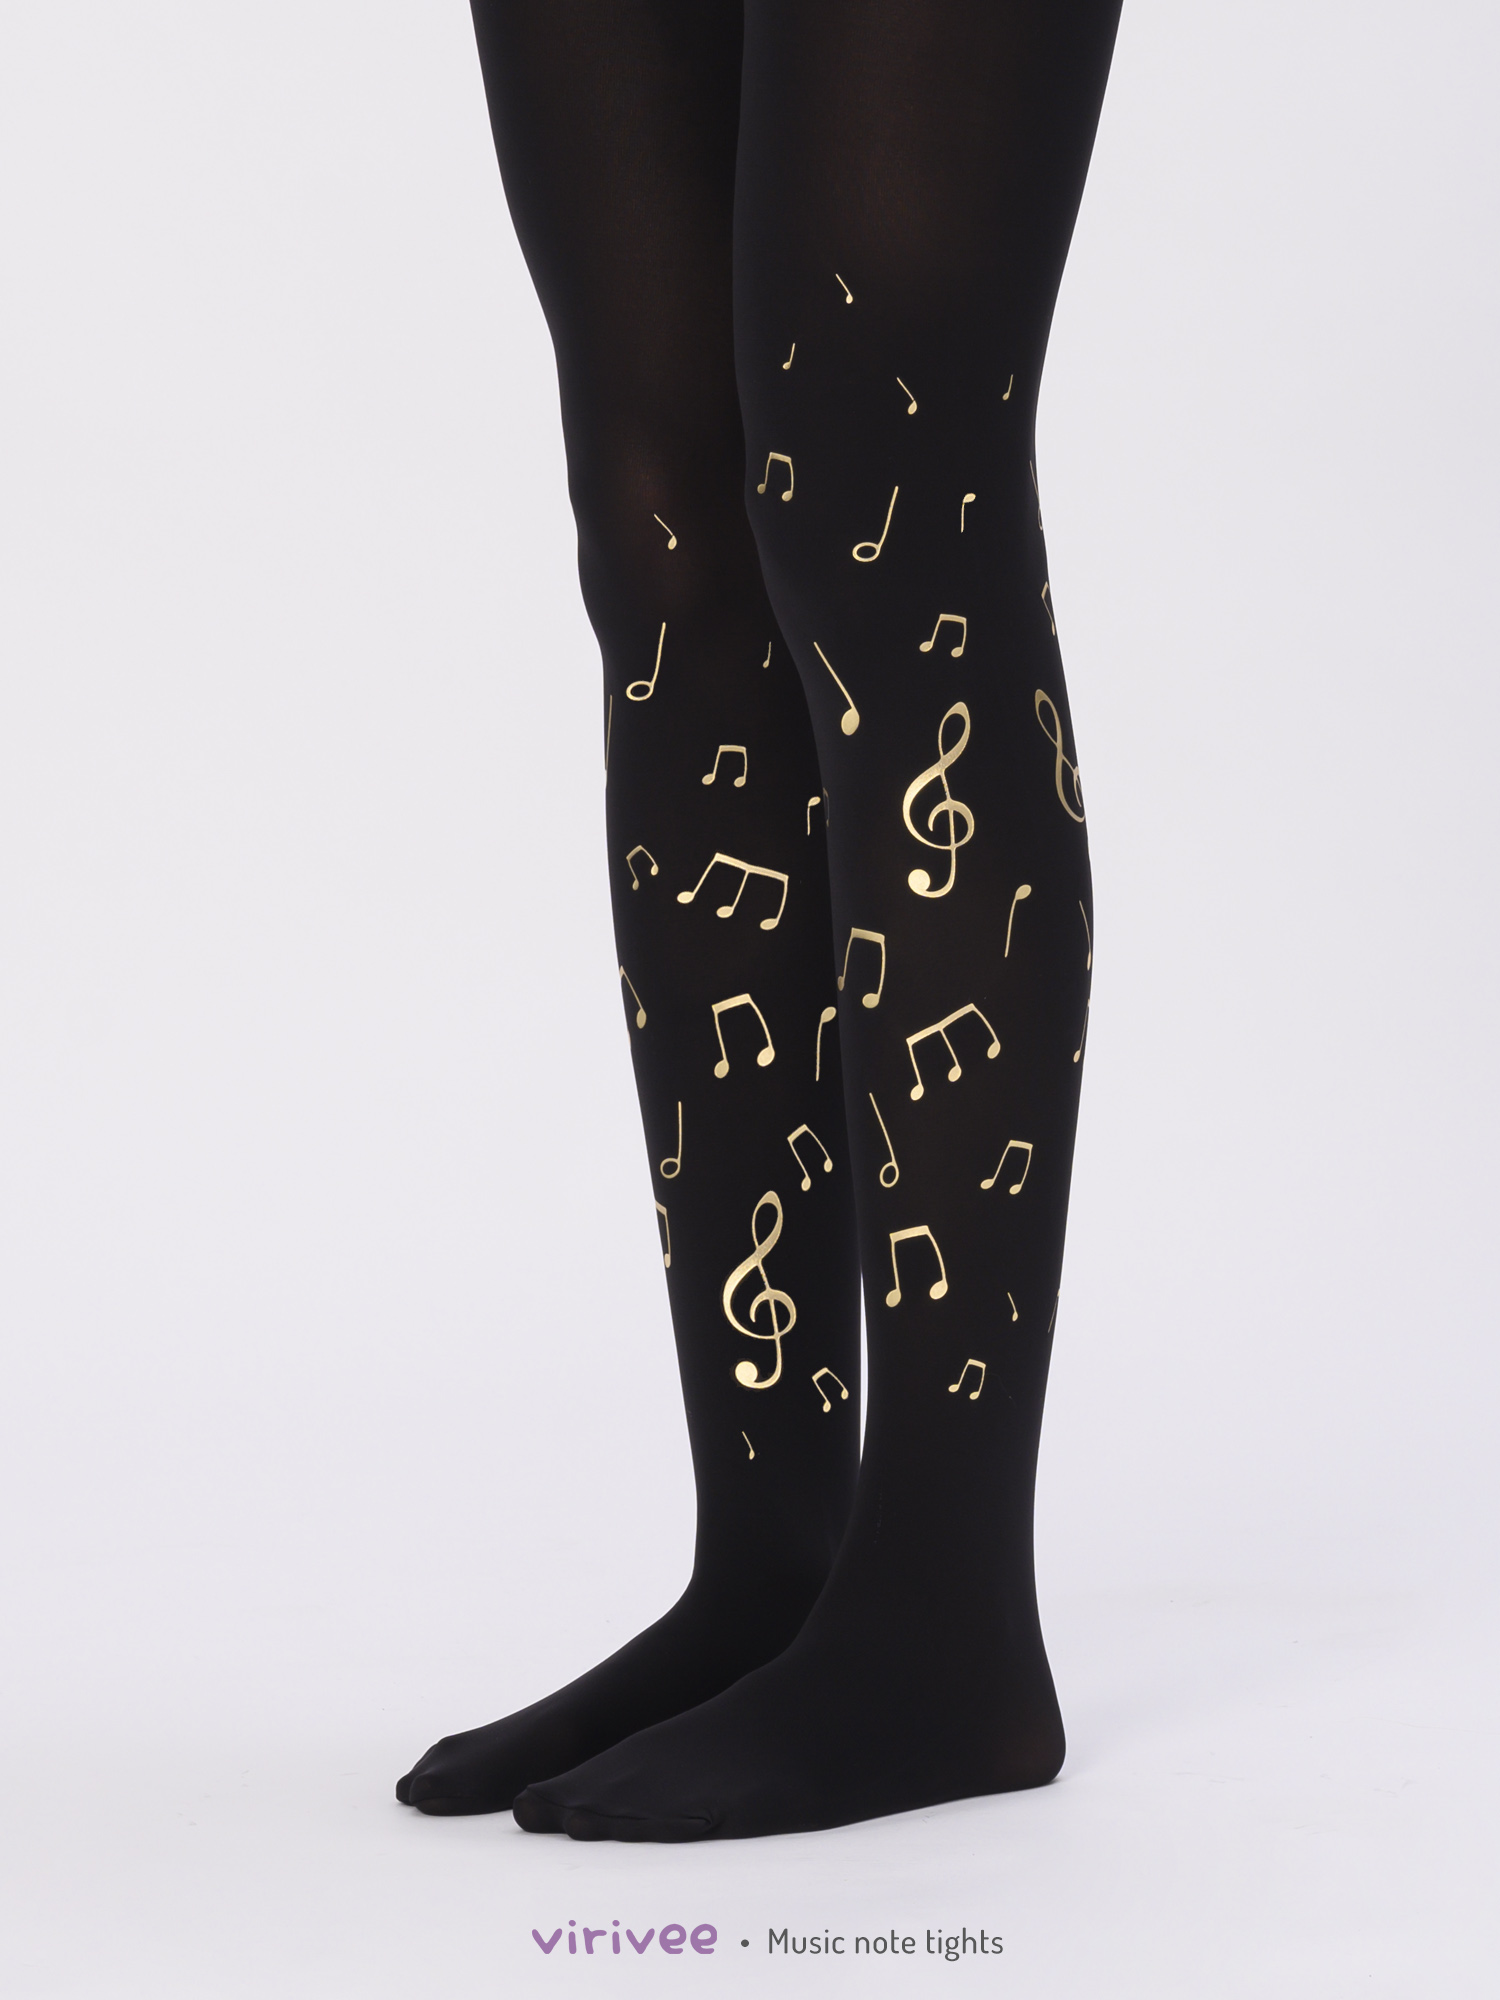 Golden music note tights by Virivee